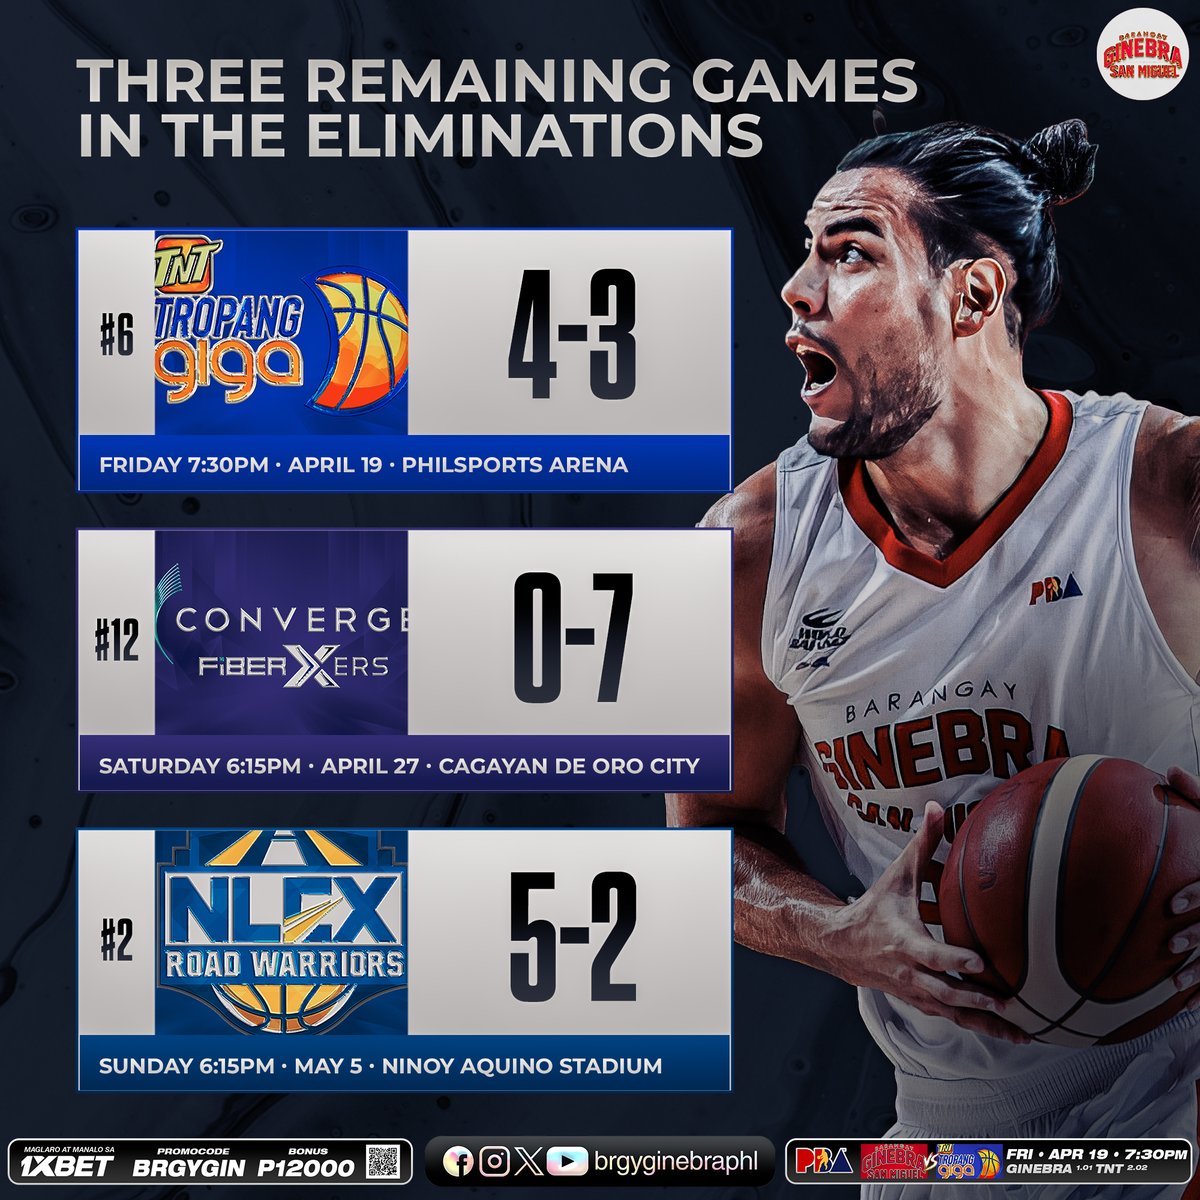 If we win all three of our remaining games, we’ll guarantee a twice-to-beat advantage! #NSD